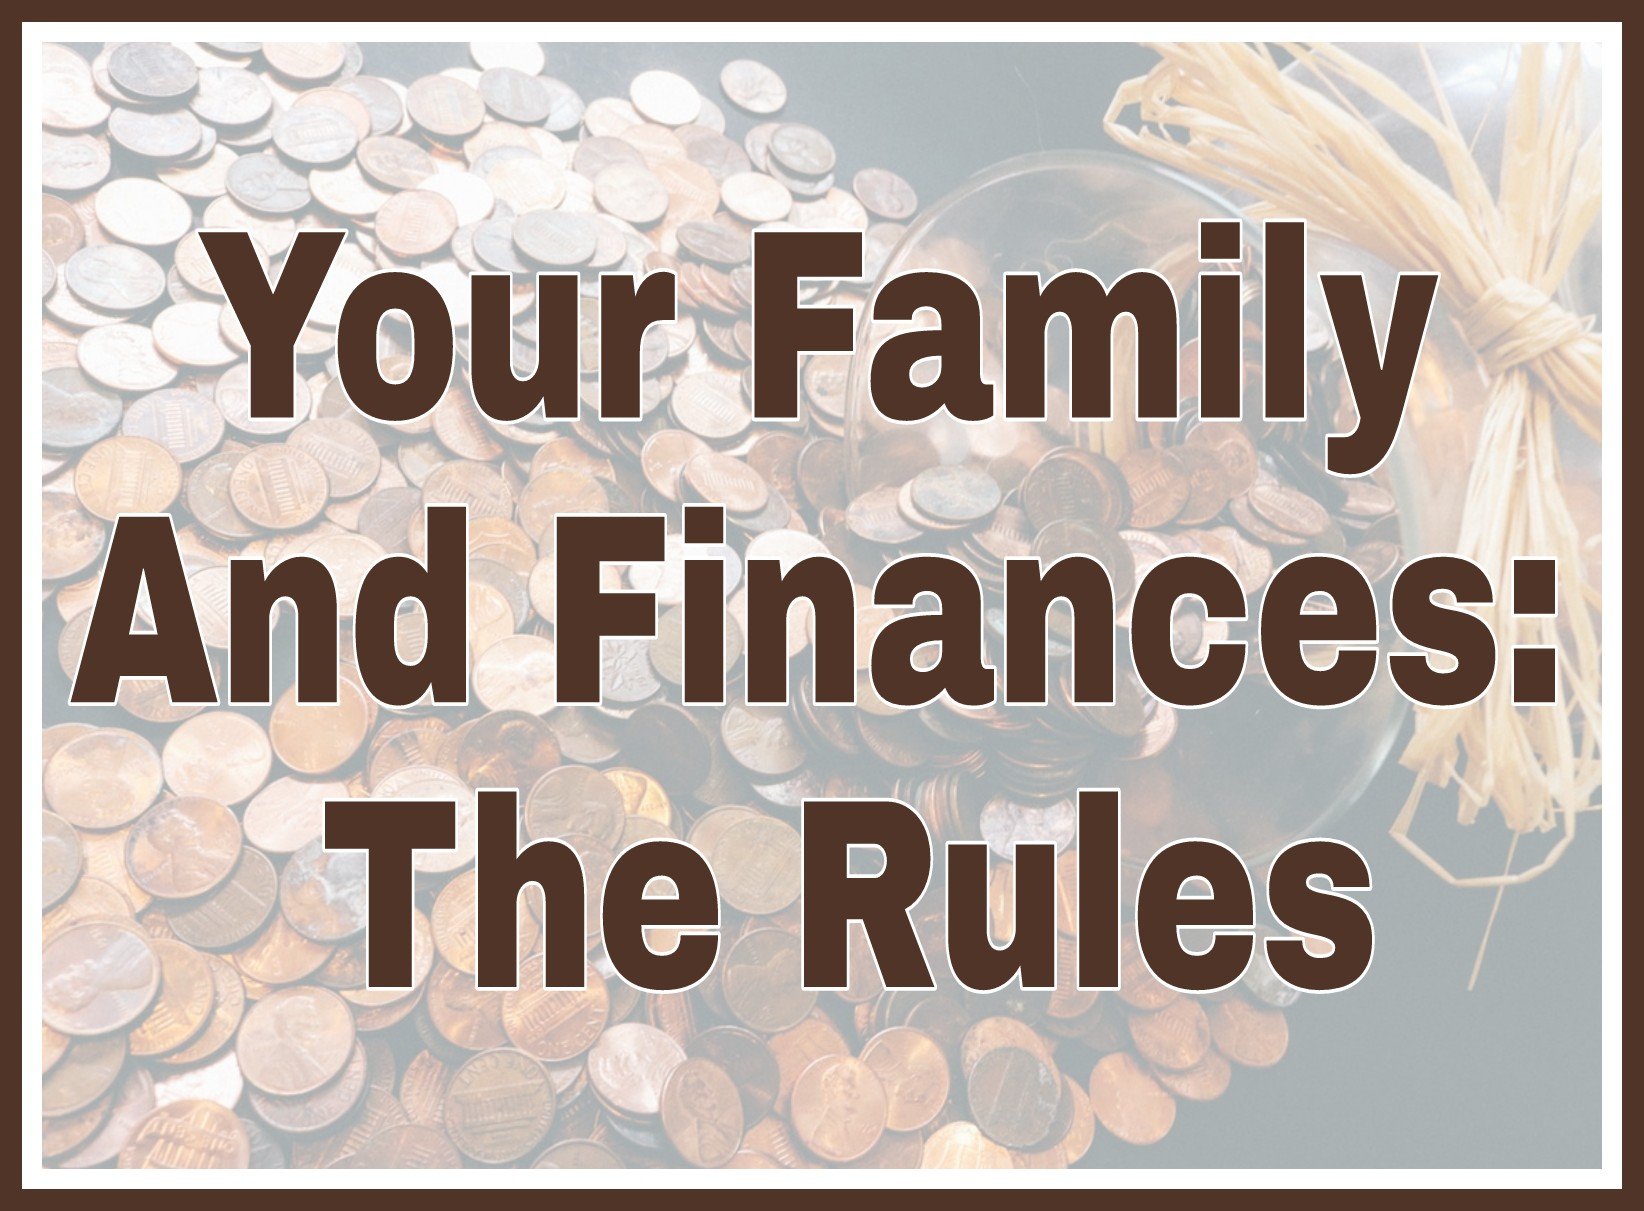 Your Family And Finances: The Rules title on faded background image of pennies